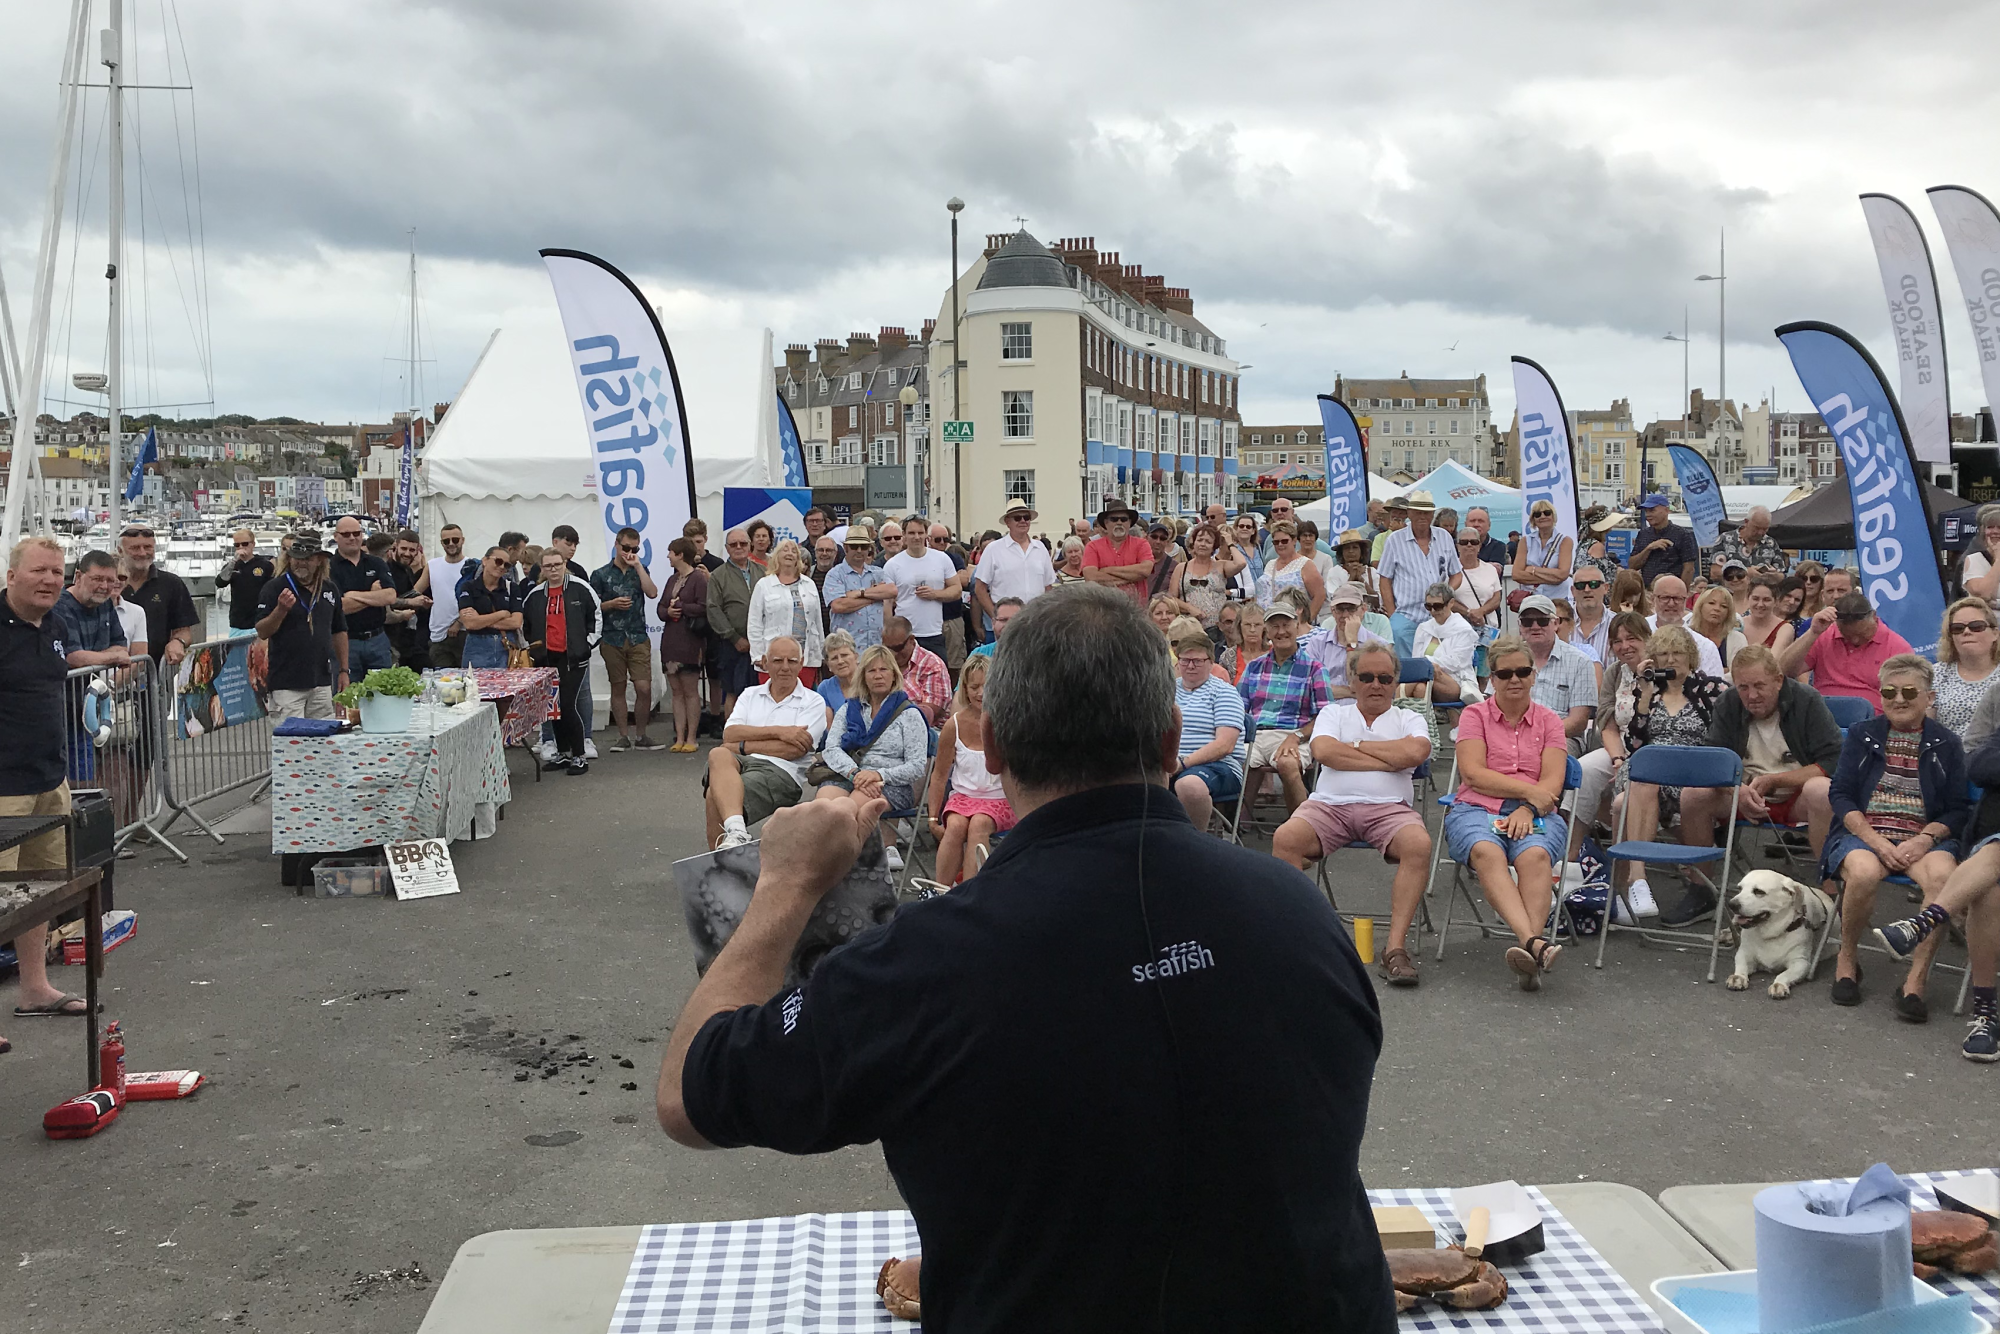 Photo showing crowd watching a cooking demonstration at the 2019 Dorset Seafood Festival